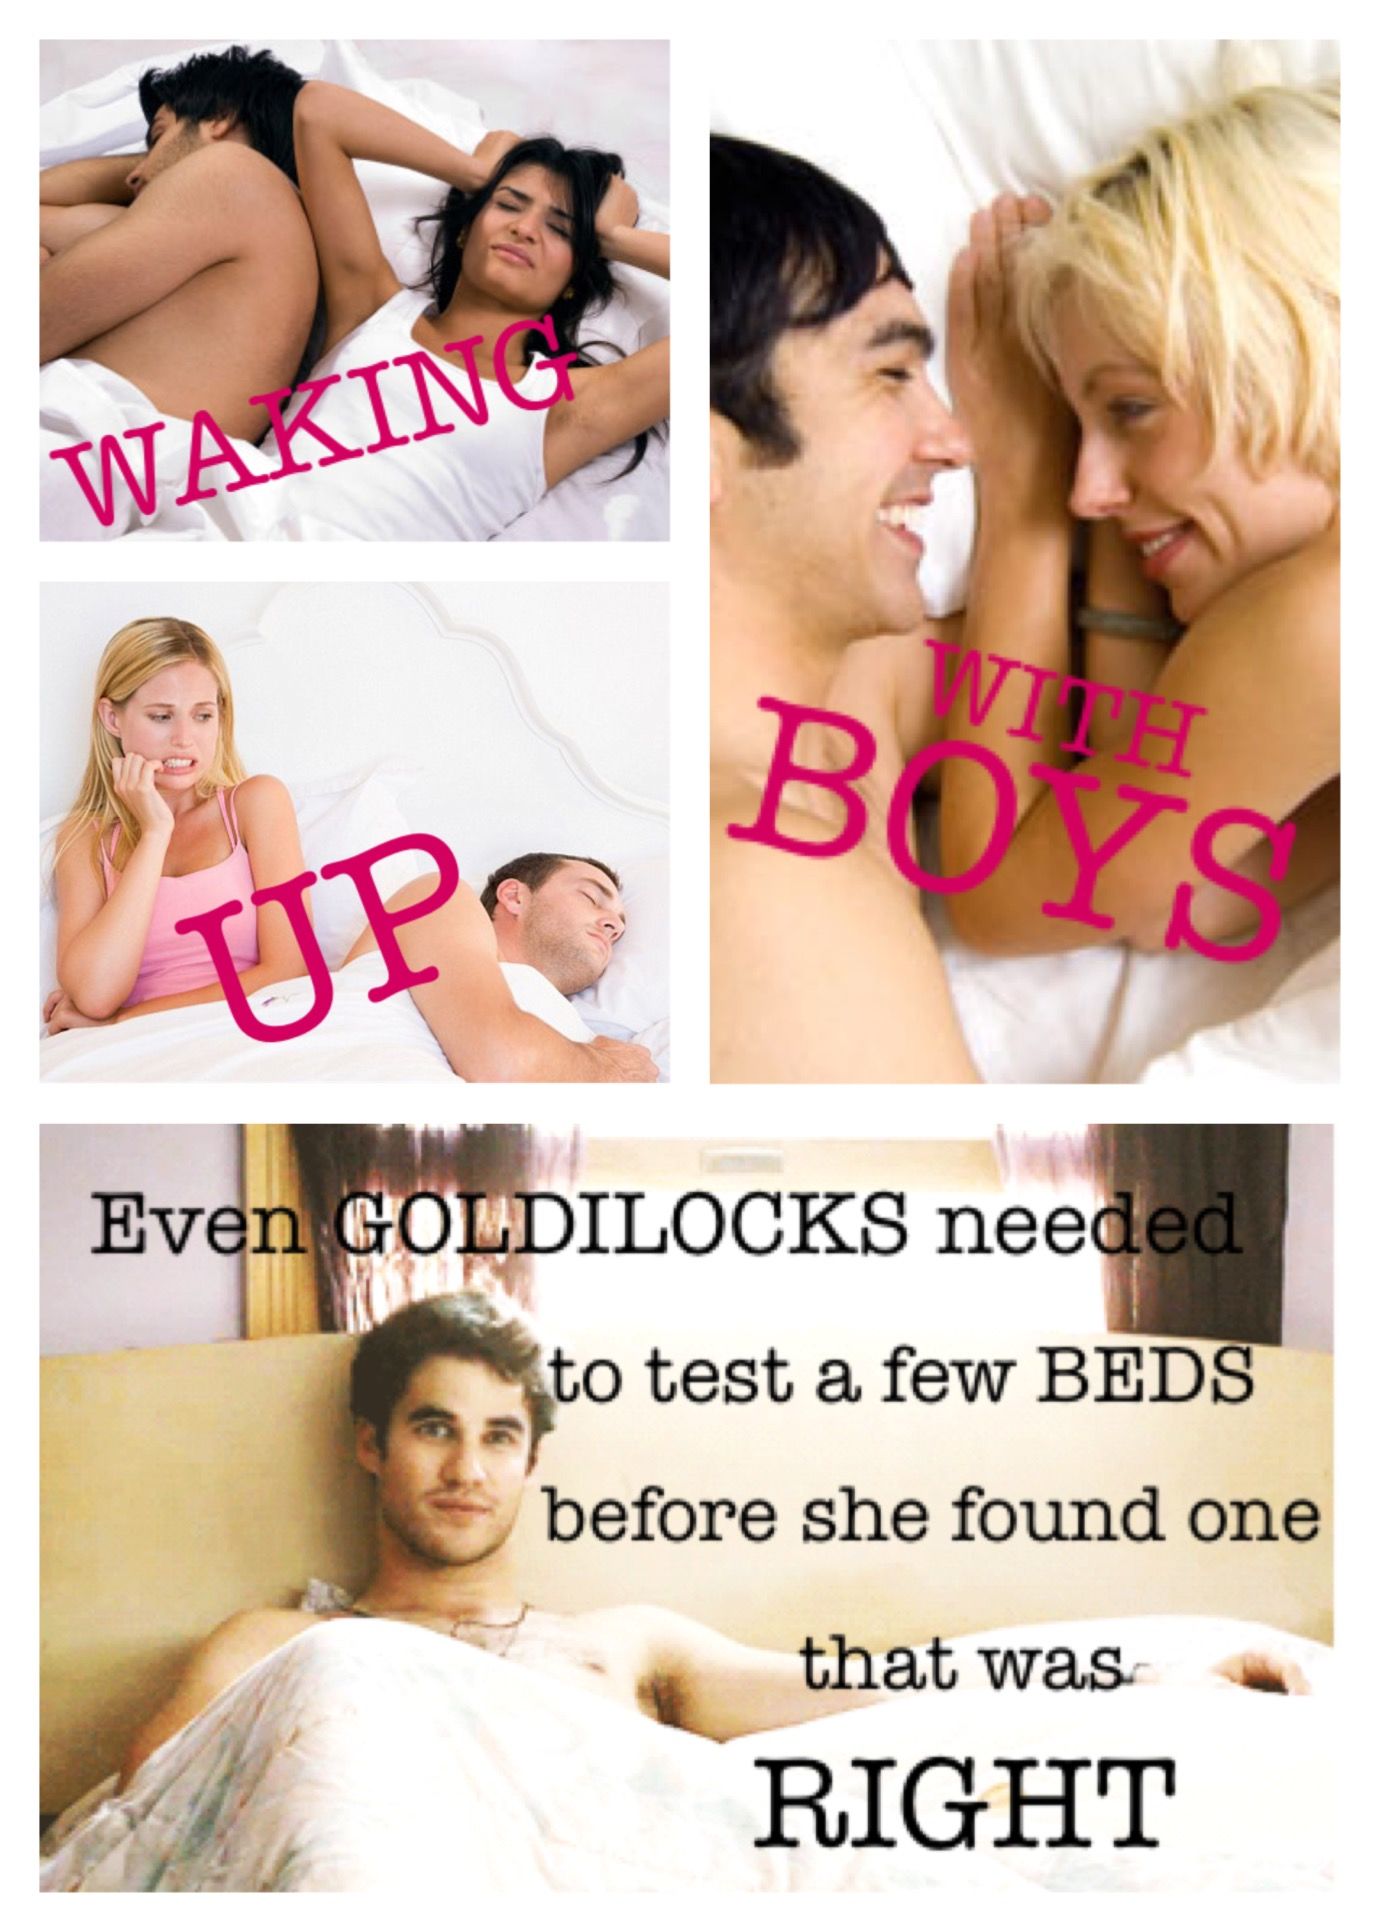 WAKING UP WITH BOYS